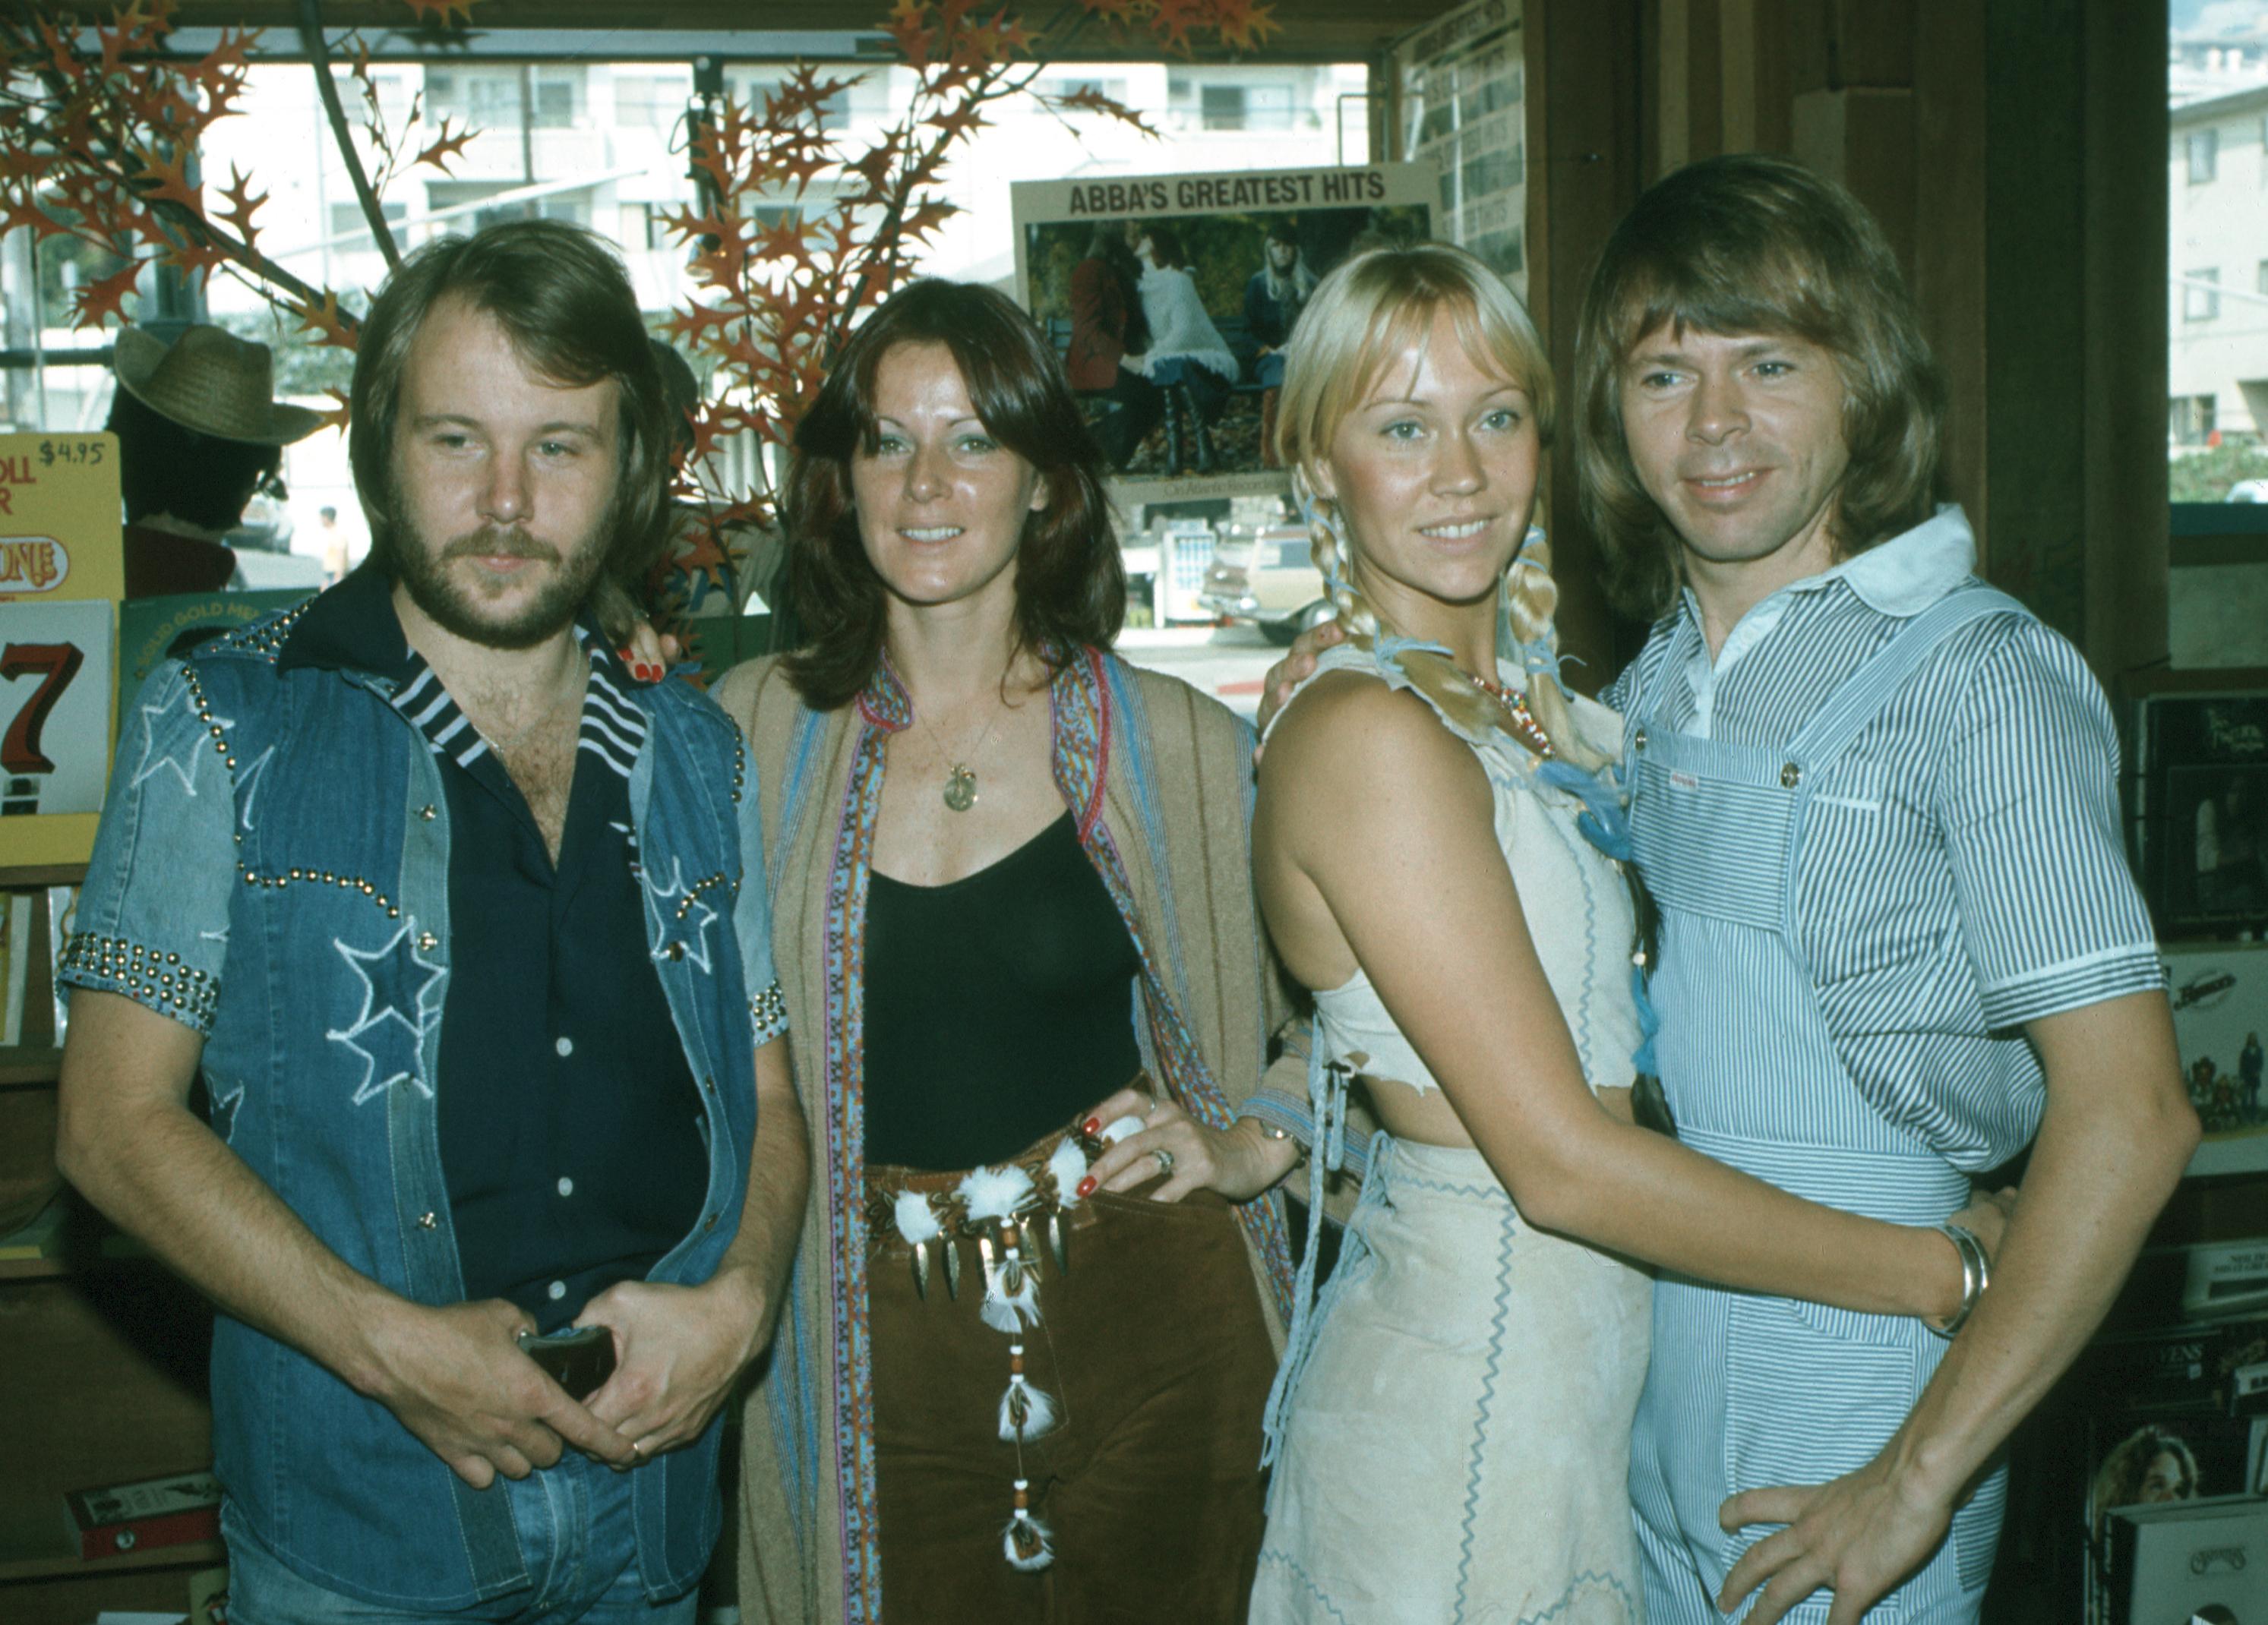 The members of ABBA were split into two couples